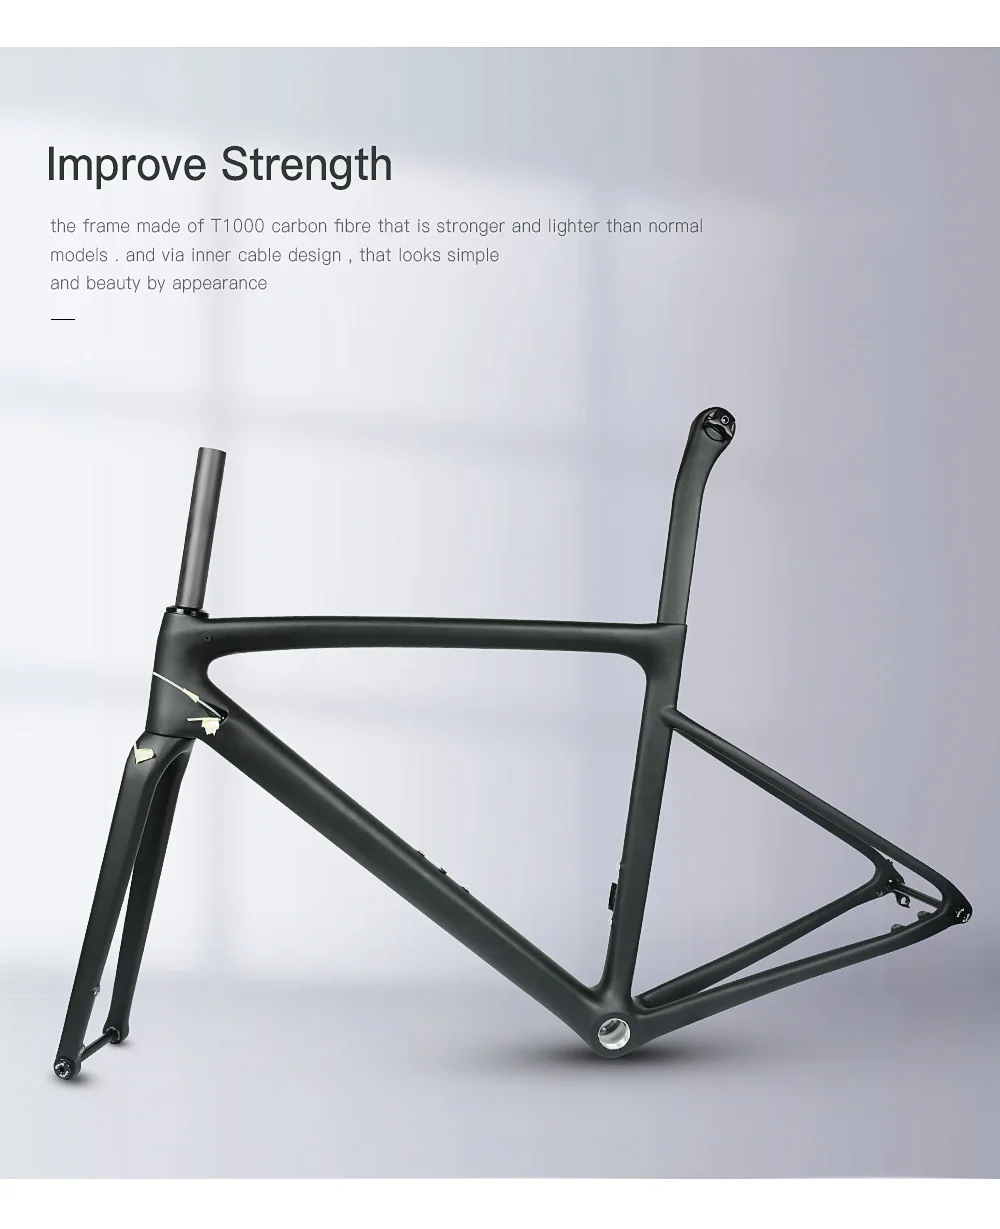 Flash Deal 2019 new vial Disc brake carbon road frame inner cable UD matte glossy BSA BB30 PF30 taiwan carbon frame light road frame 7